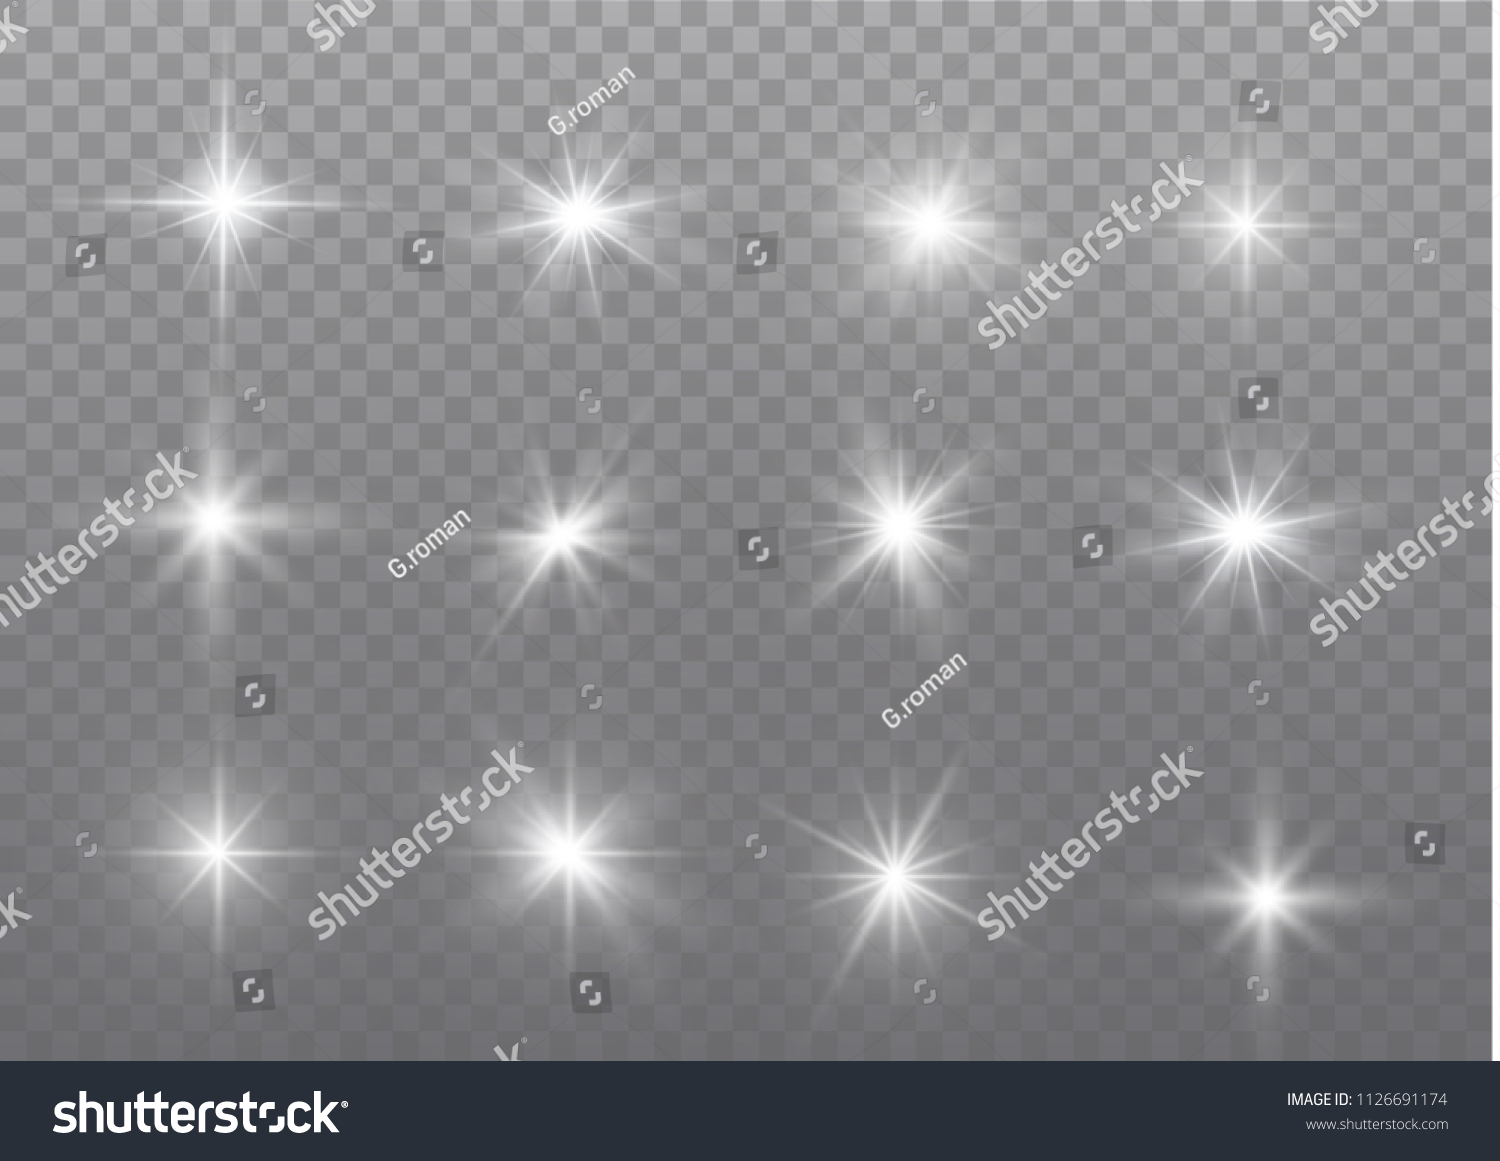 Glow Isolated White Transparent Light Effect Stock Vector Royalty Free Shutterstock